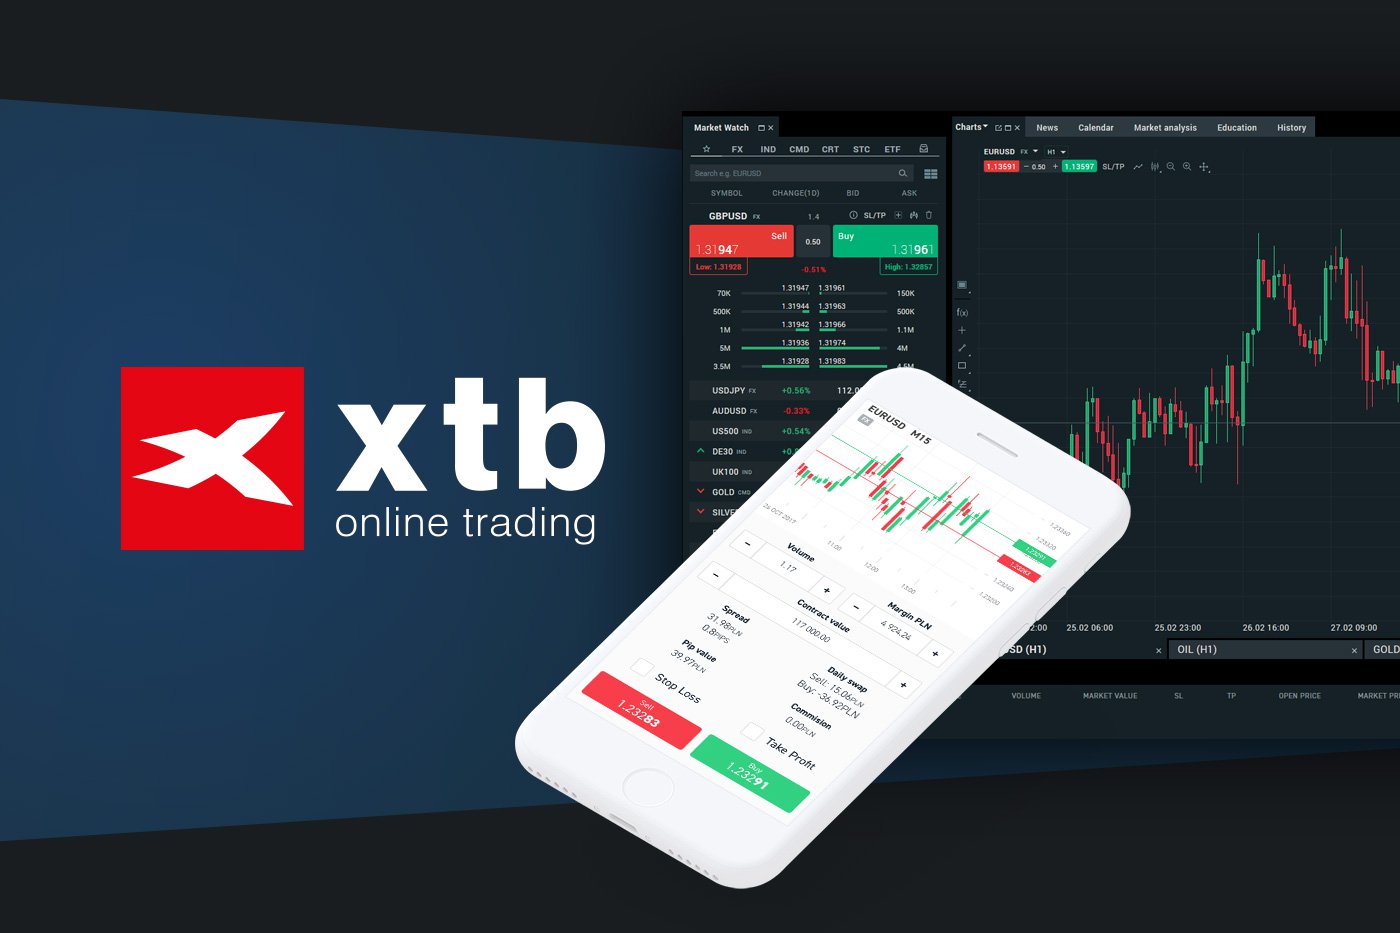 XTB unveils industry-leading 5% interest on client deposits